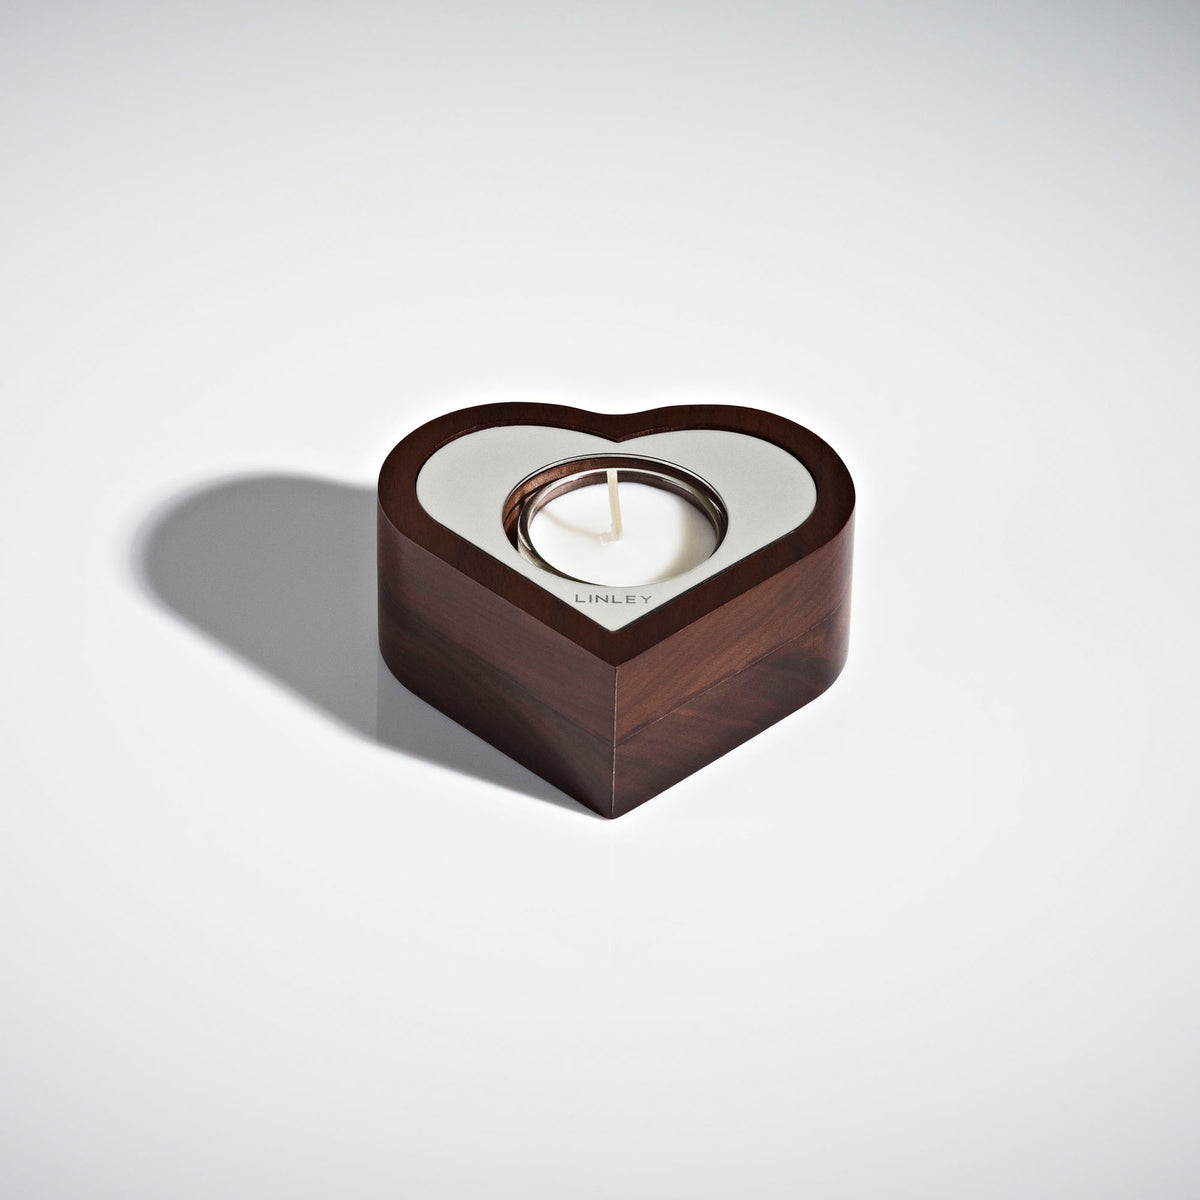 Heart Candle | Luxury Home Accessories & Gifts | LINLEY